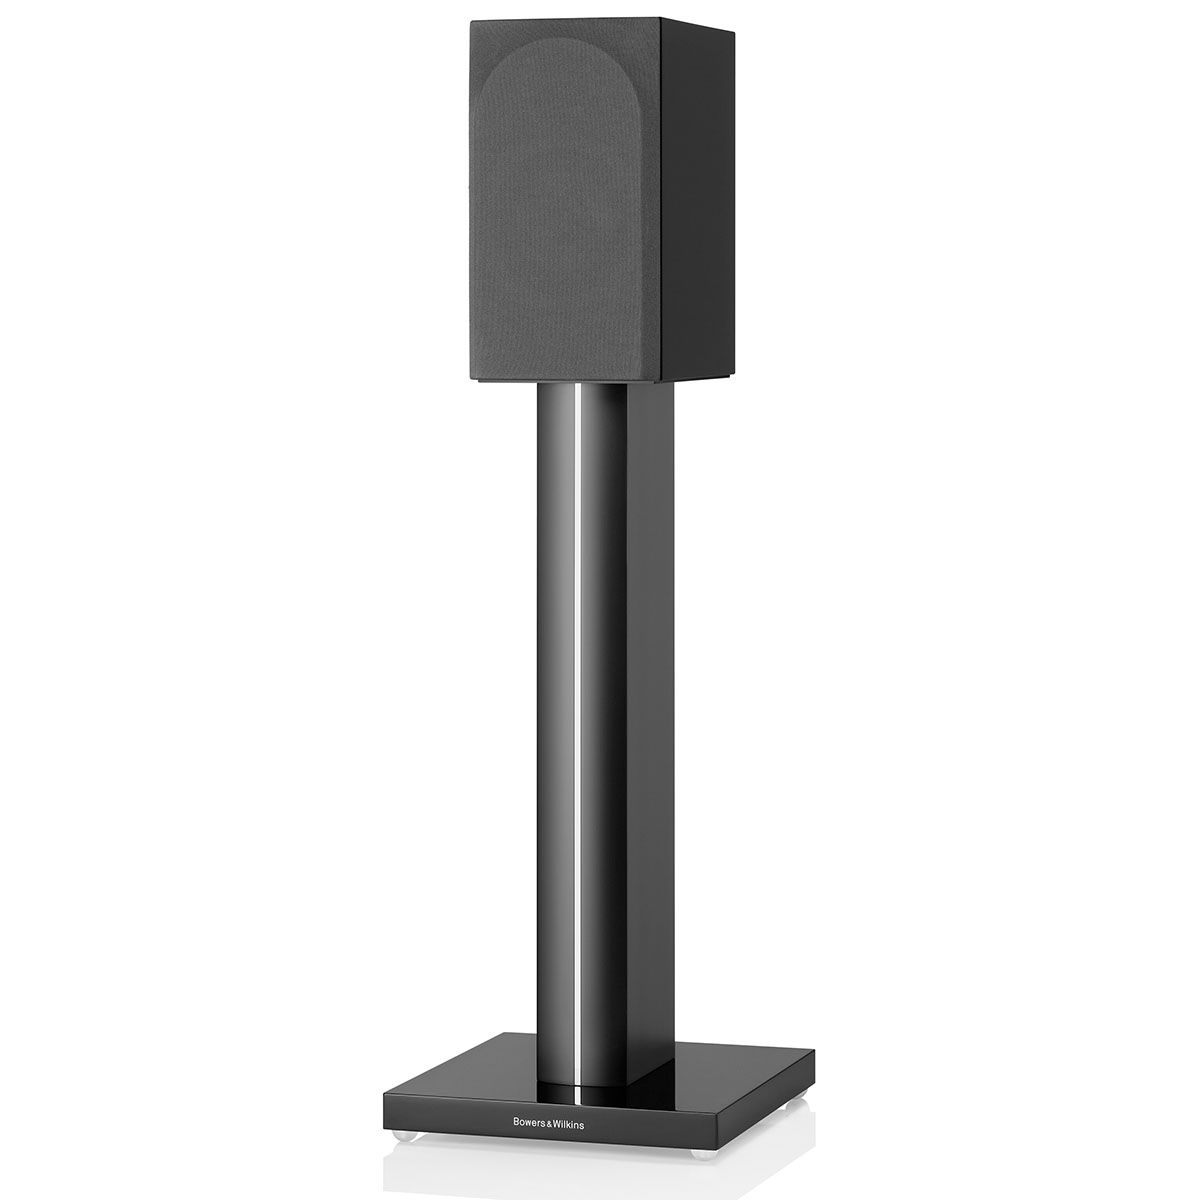 Bowers & Wilkins 707 S3 2-Way Stand Mount Bookshelf Loudspeakers - Gloss Black - on stand with grille